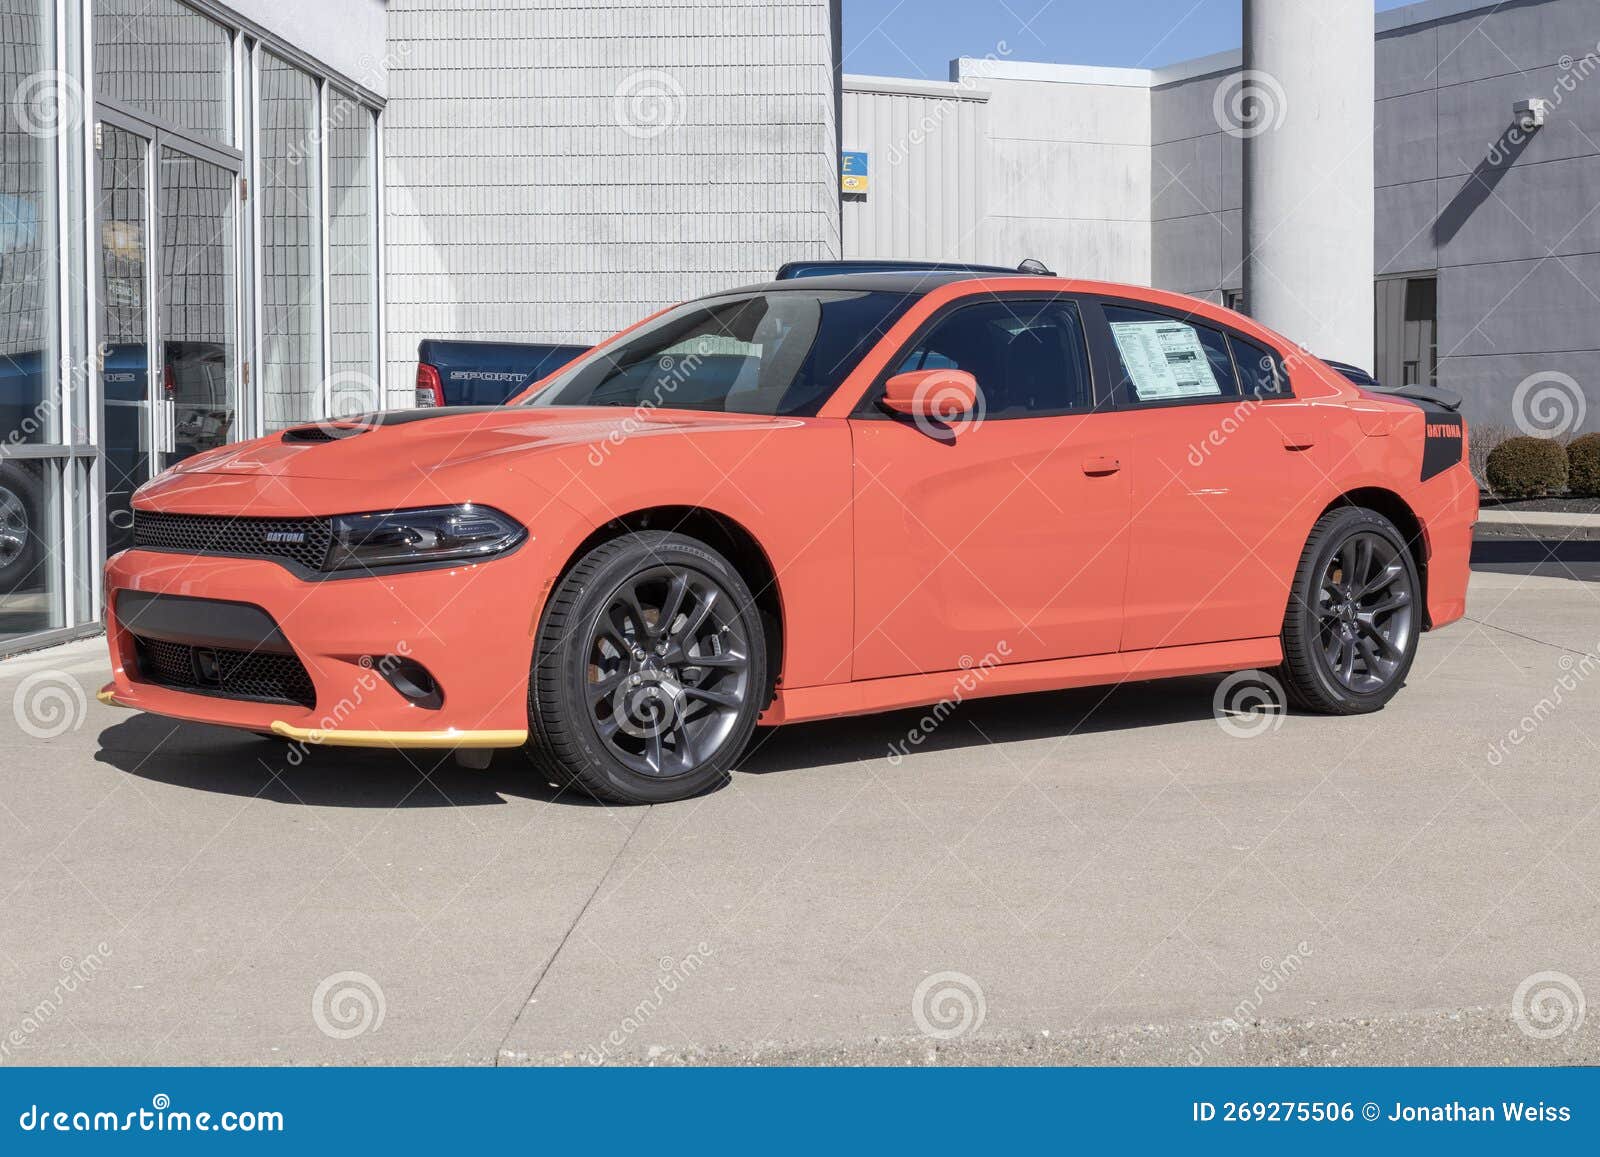 Dodge Charger R T Daytona Display Dodge Offers The Charger In Sxt Gt